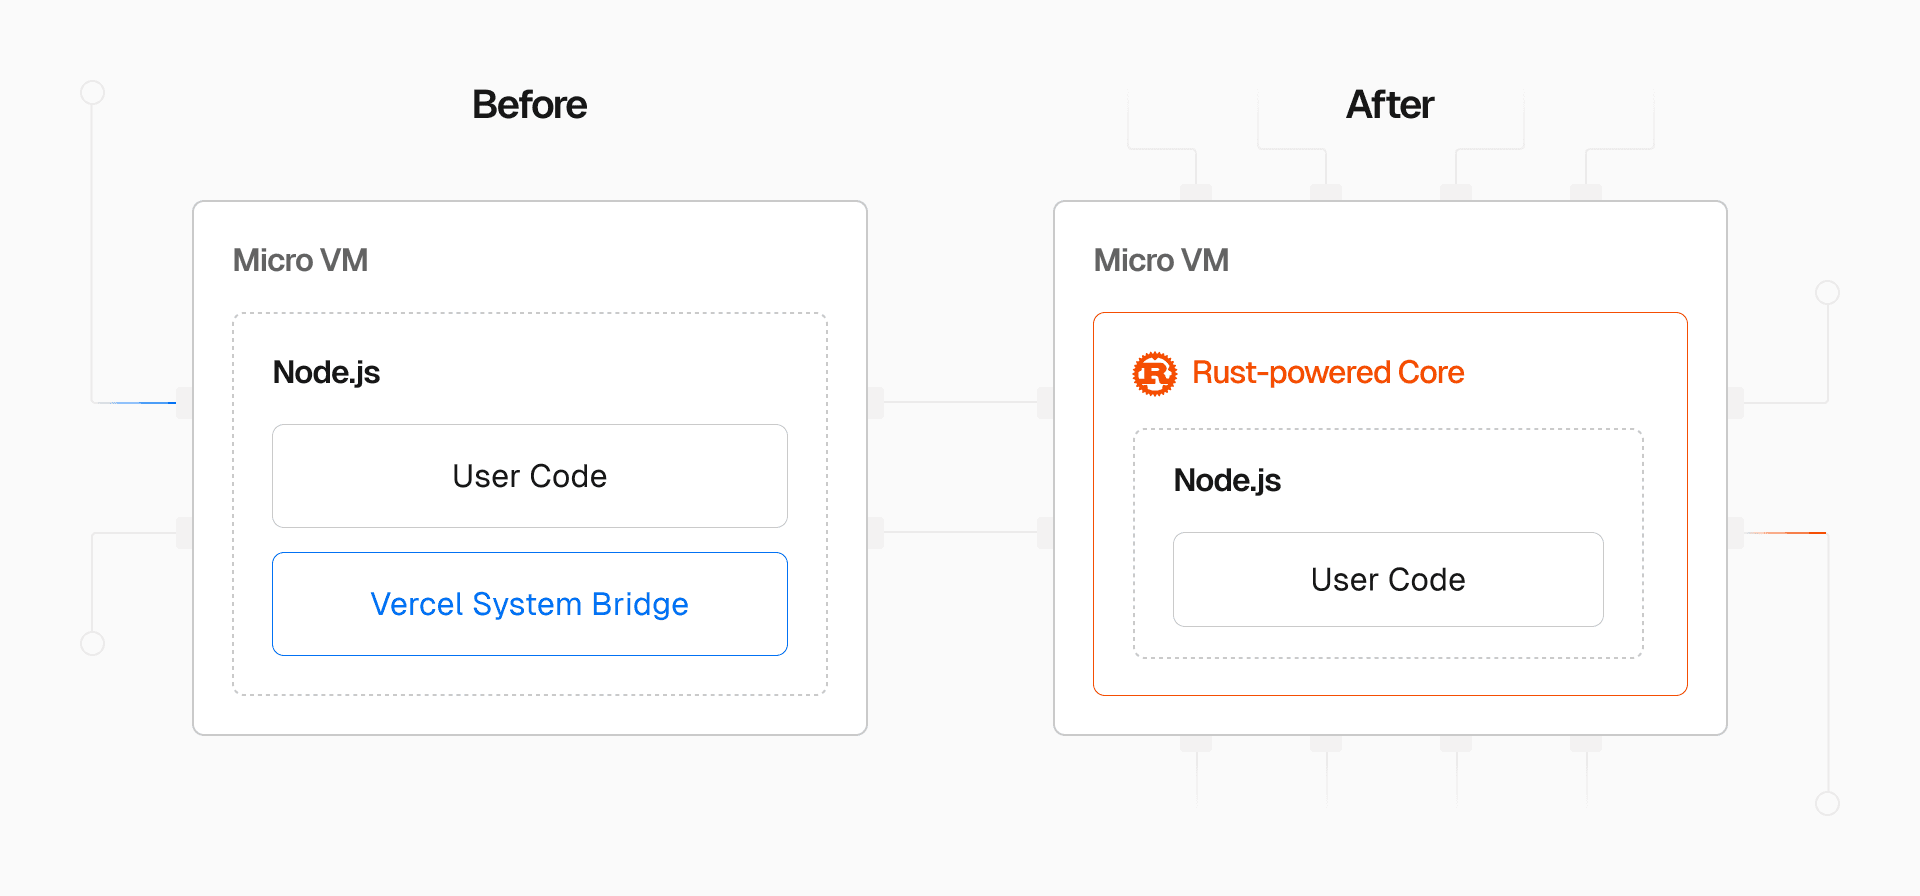 Up to 80ms faster (average) and 500ms faster (p99) for larger workloads by moving logic from Node.js to the new Rust-powered core.